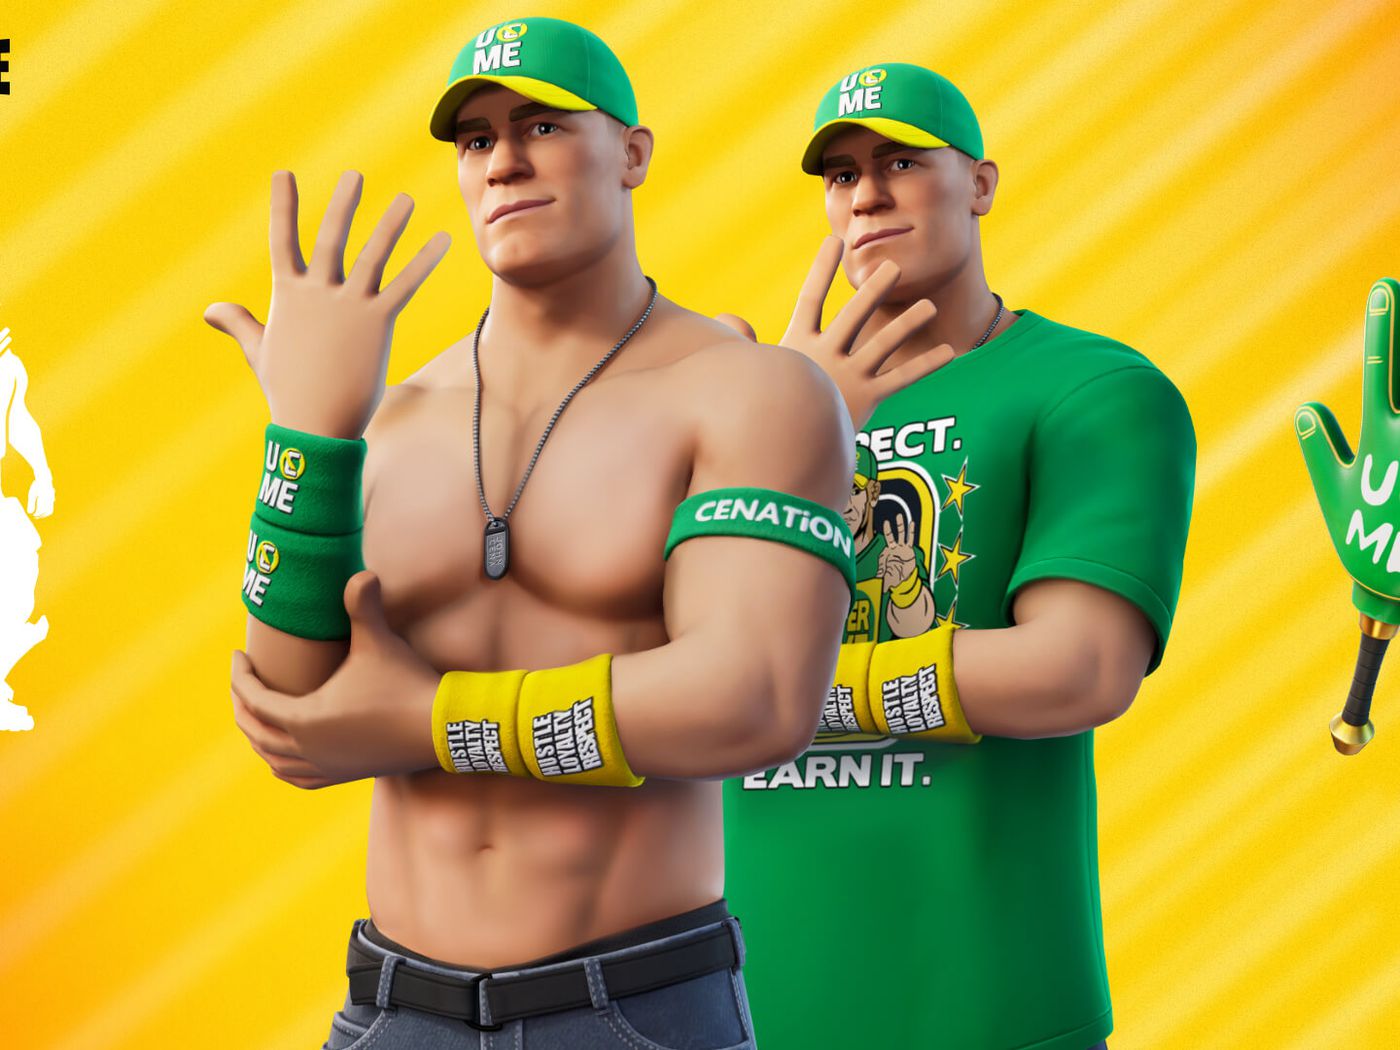 John Cena's coming to Fortnite and Rocket League